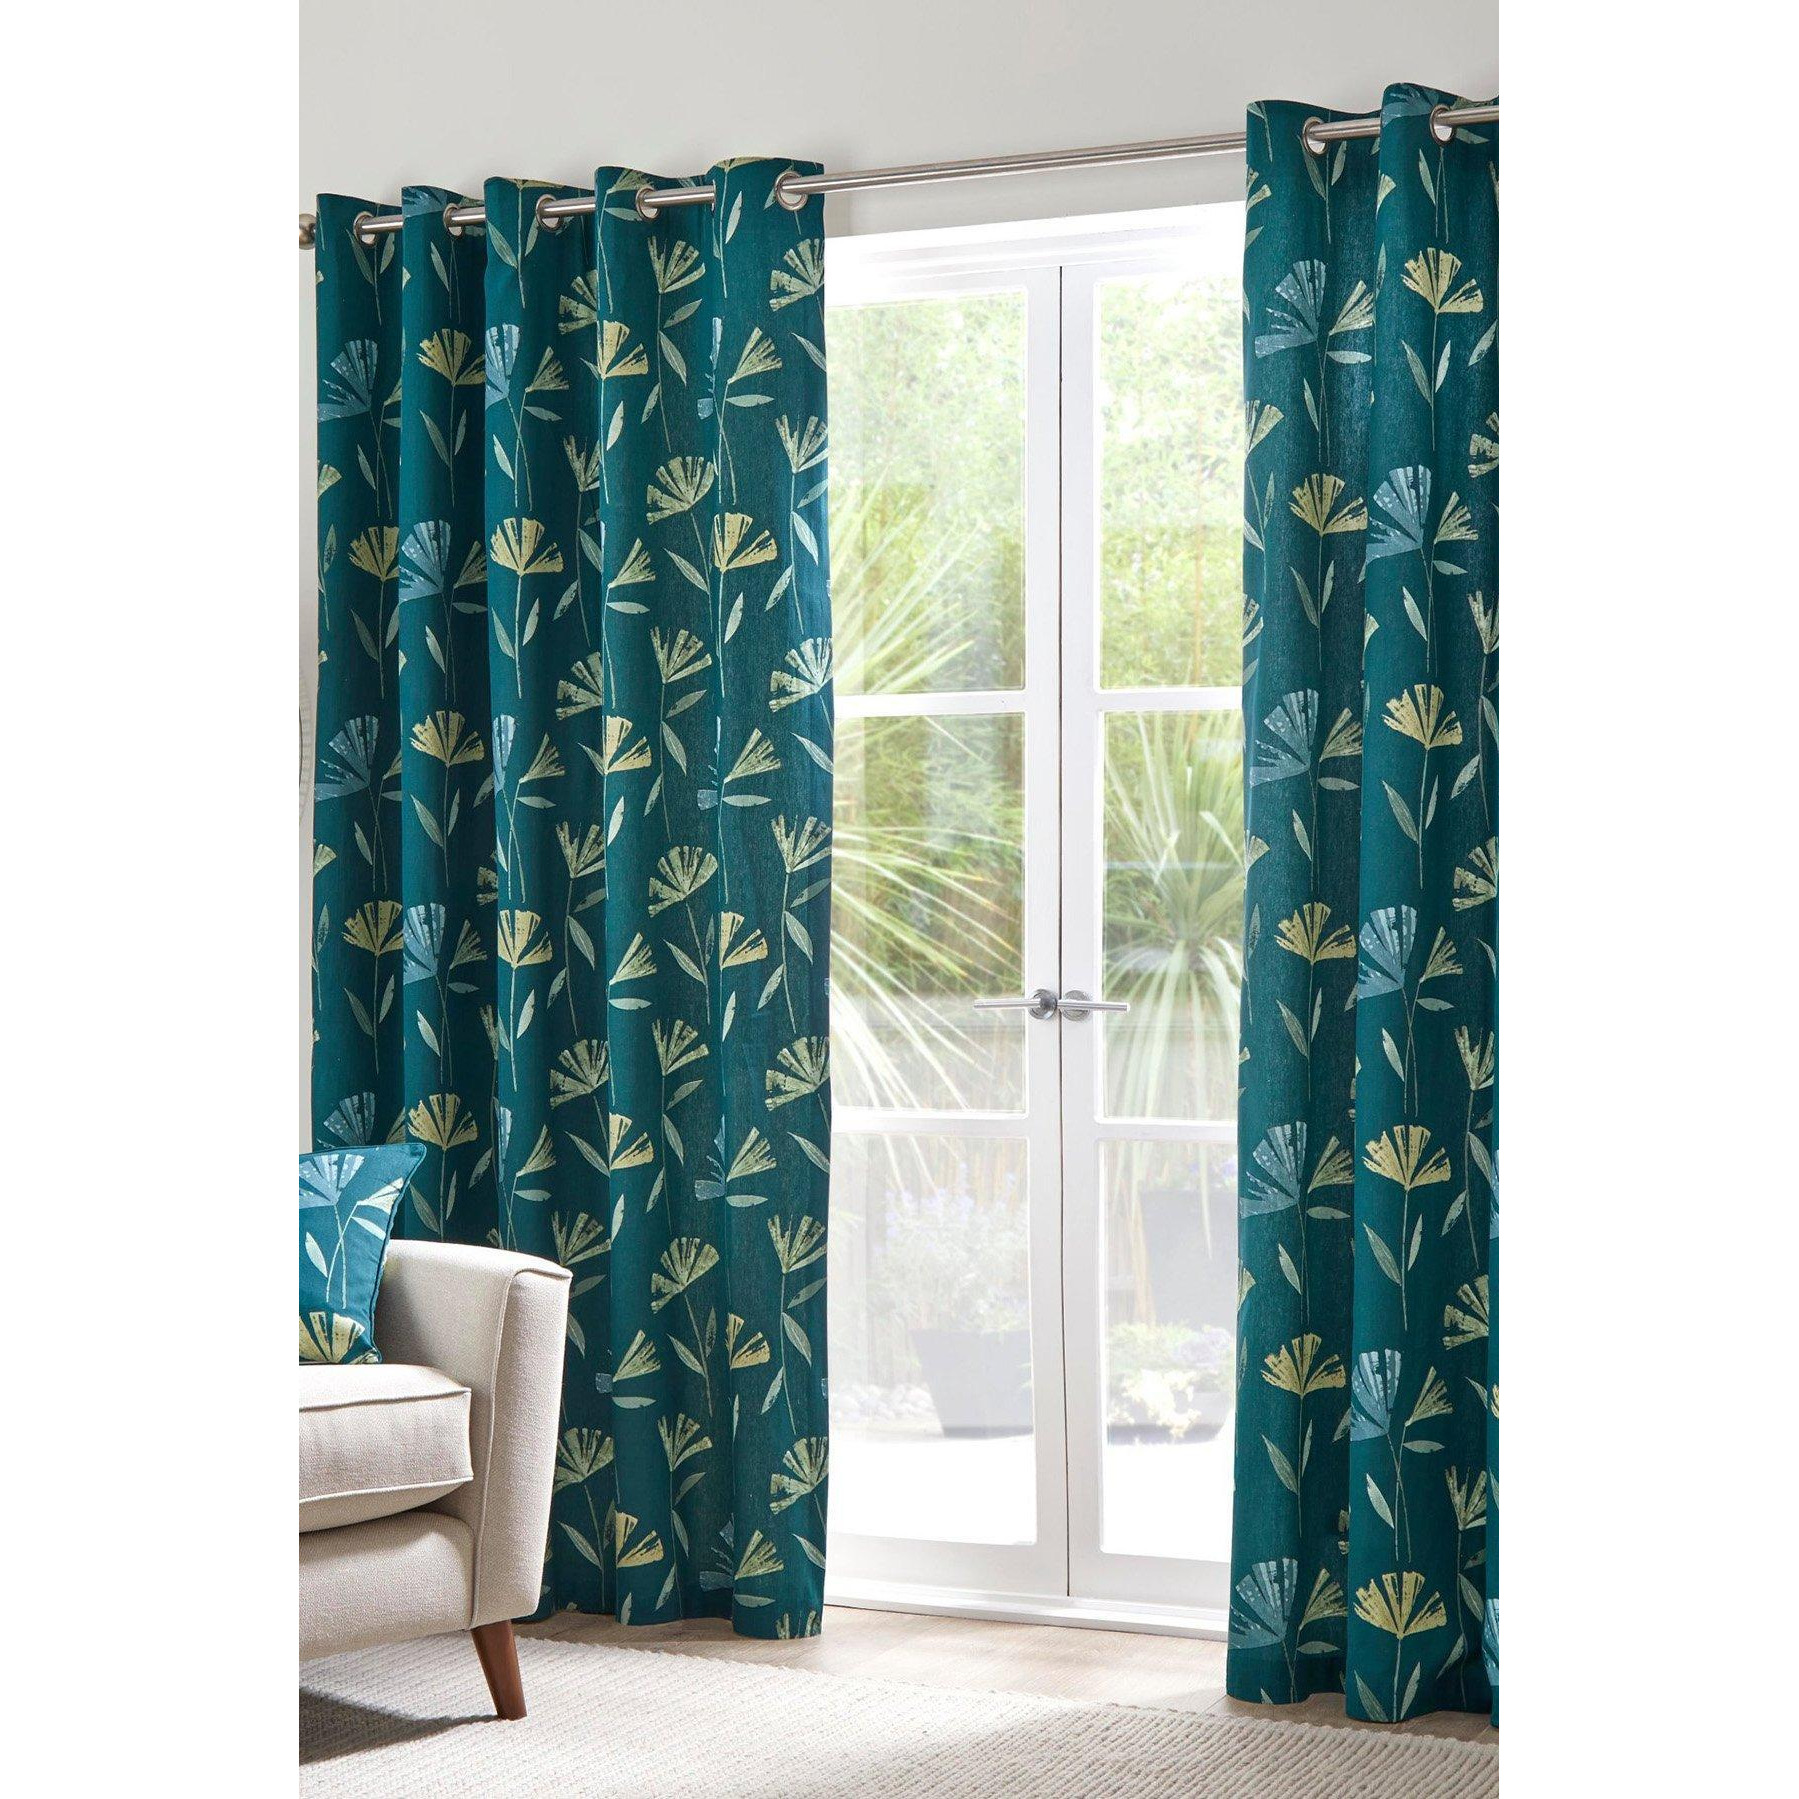 'Dacey' 100% Cotton Nature Inspired Print Pair of Eyelet Curtains - image 1